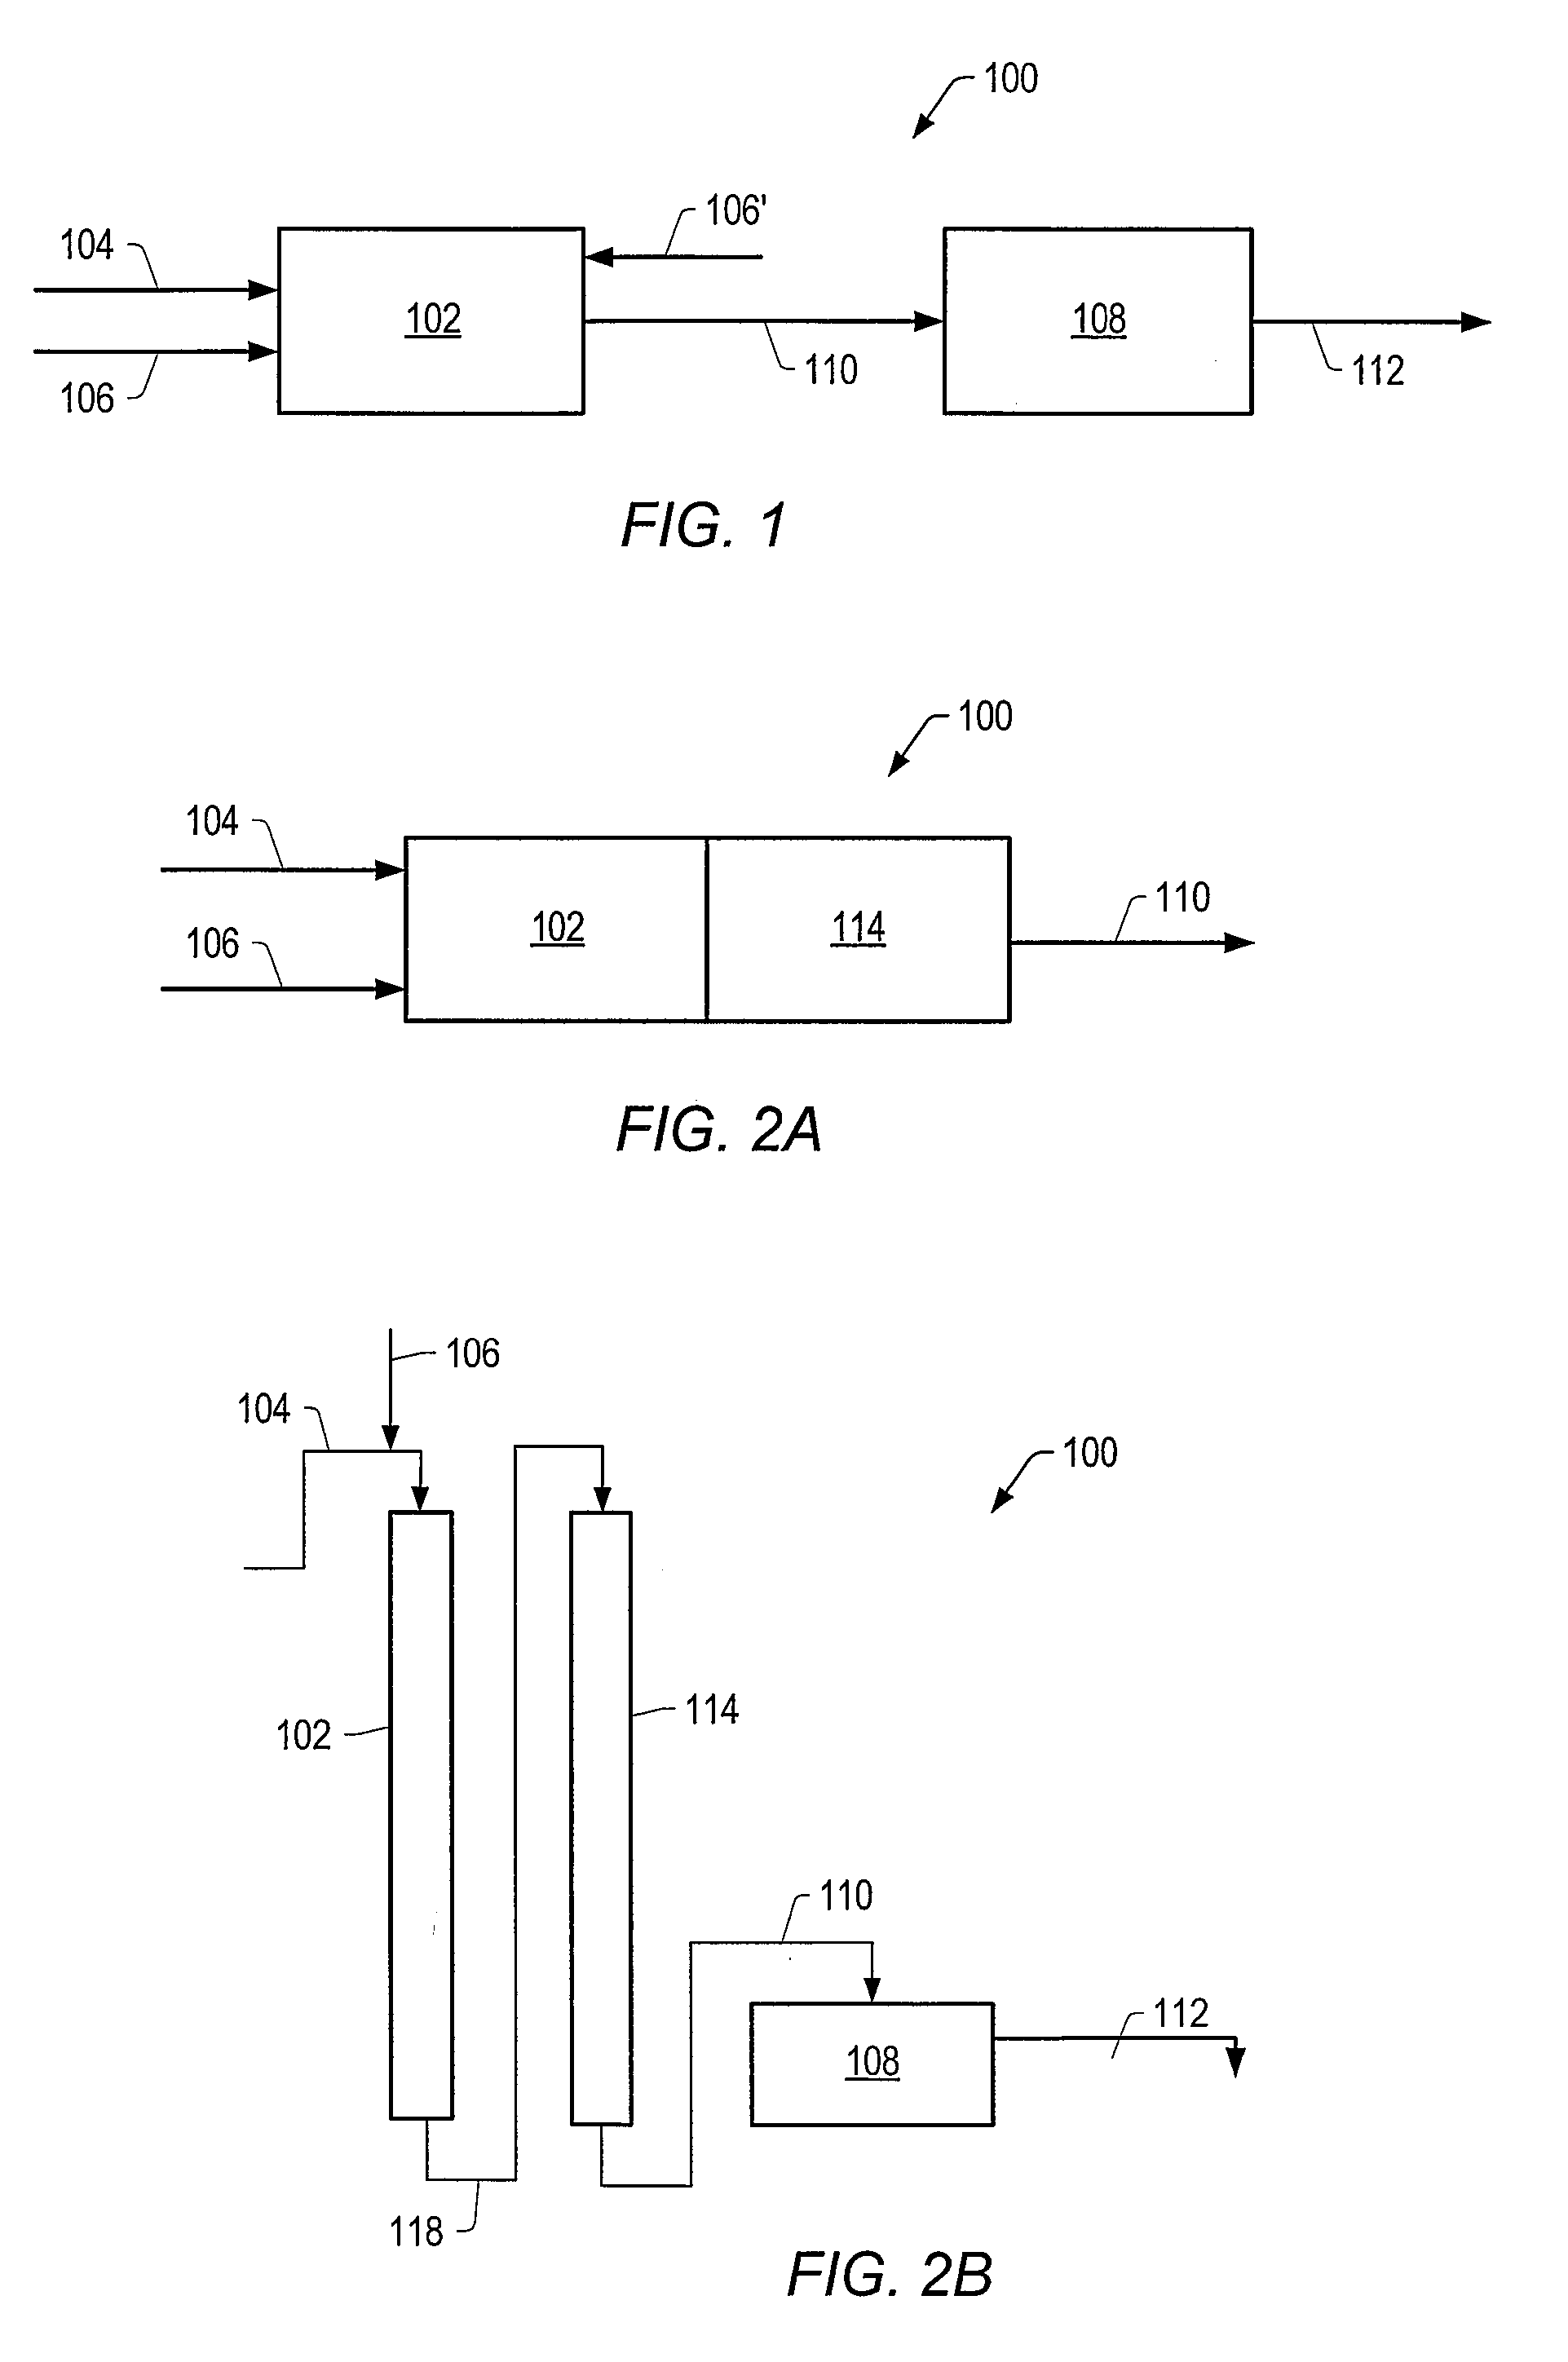 Systems for treating a hydrocarbon feed